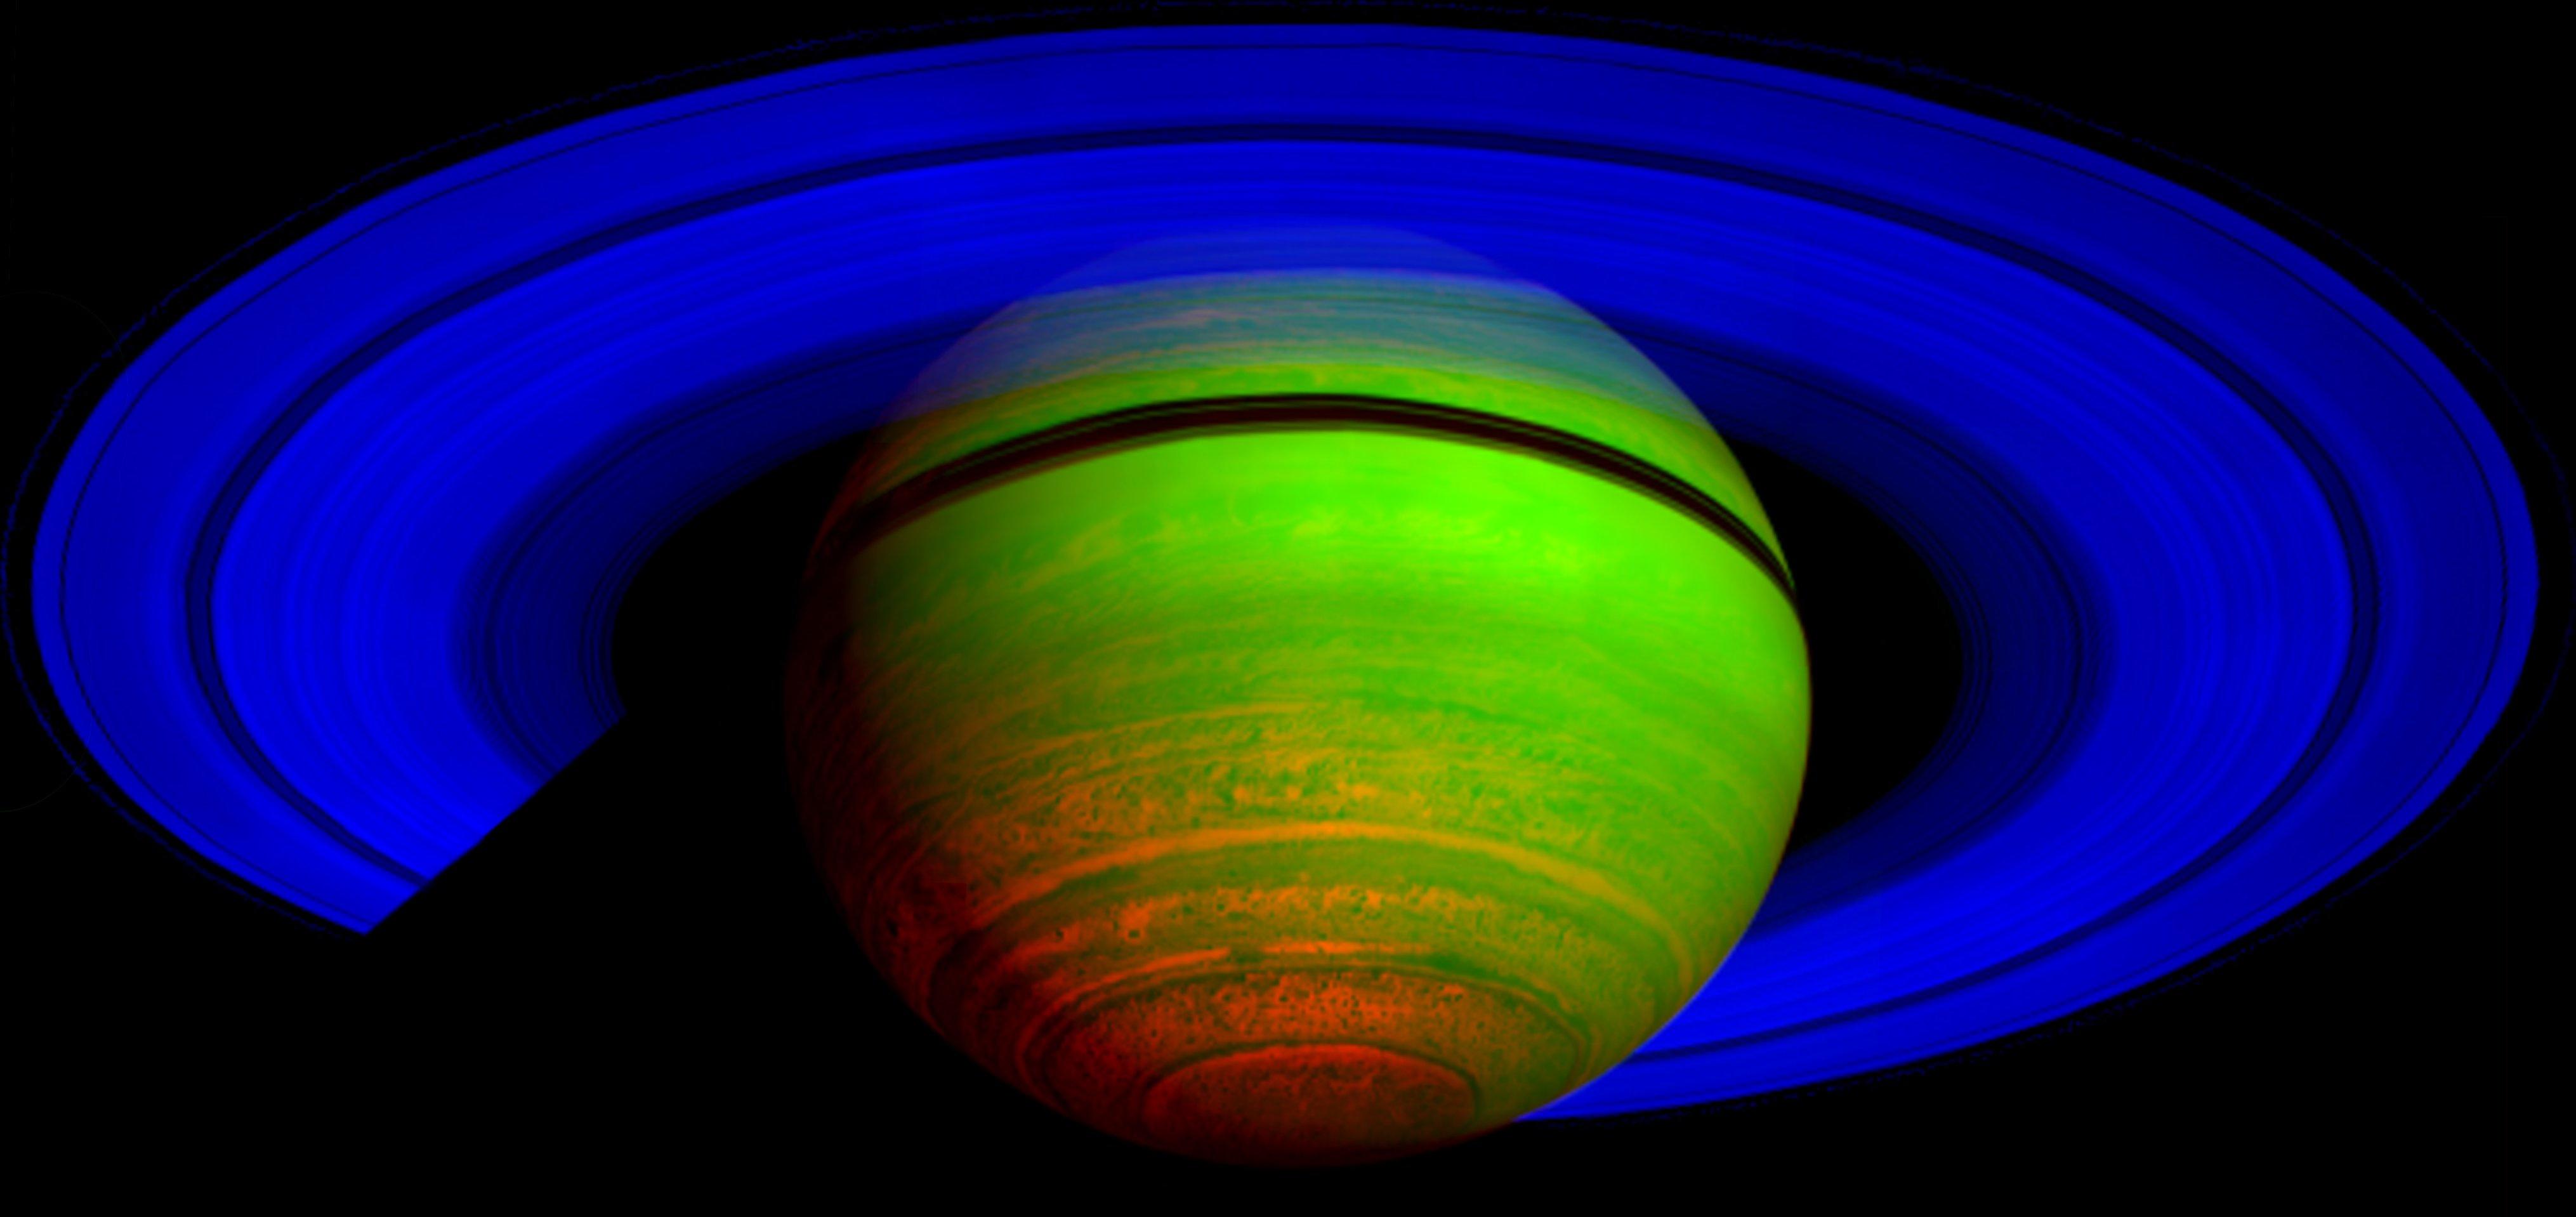 This false-color composite image shows Saturn's rings and southern hemisphere